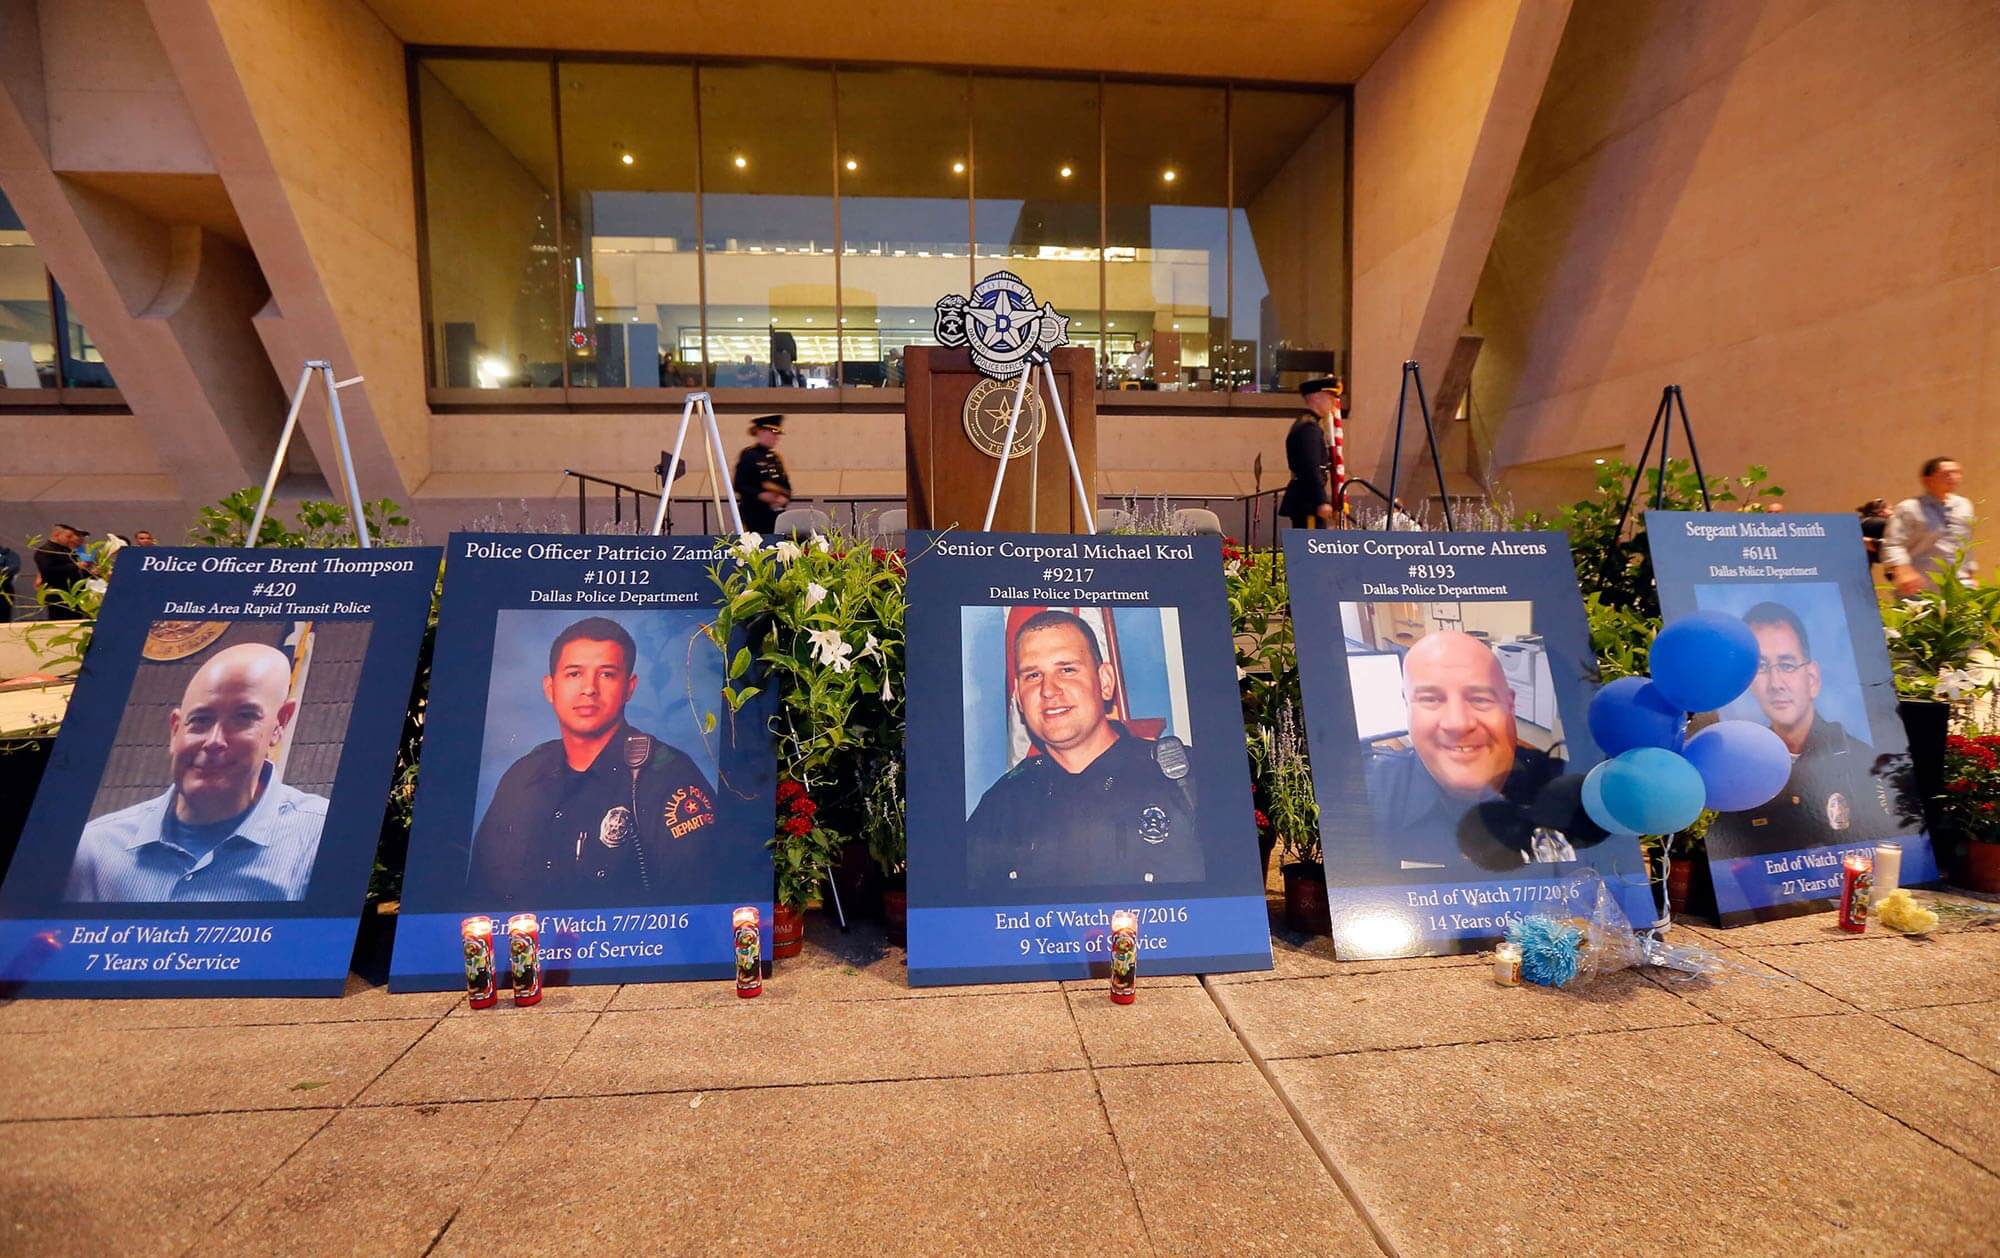 Image of memorial to the five dead police officers in Dallas